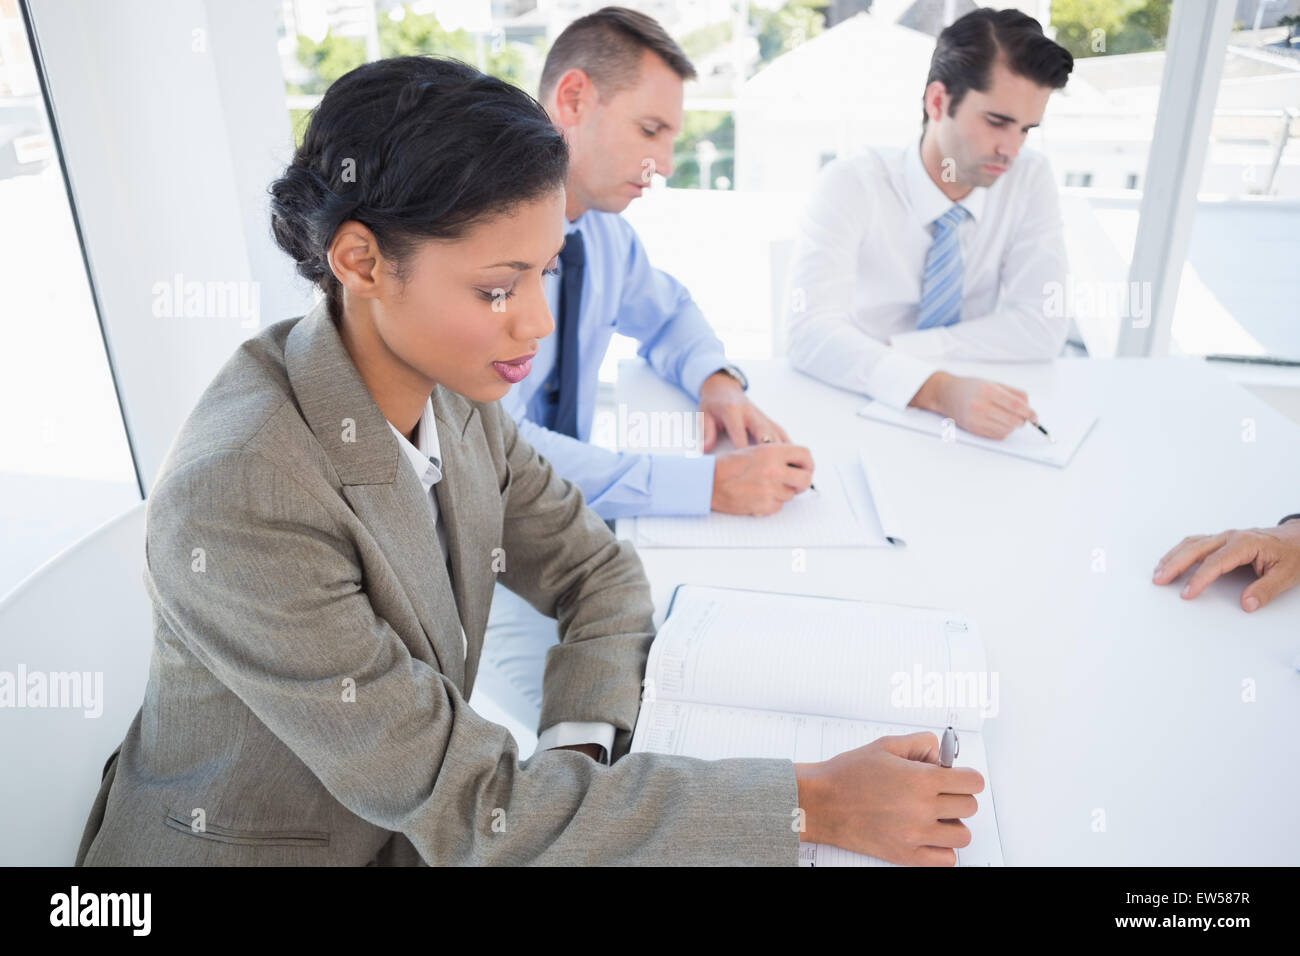 Business team writing brainstorming ideas in their notepad Stock Photo